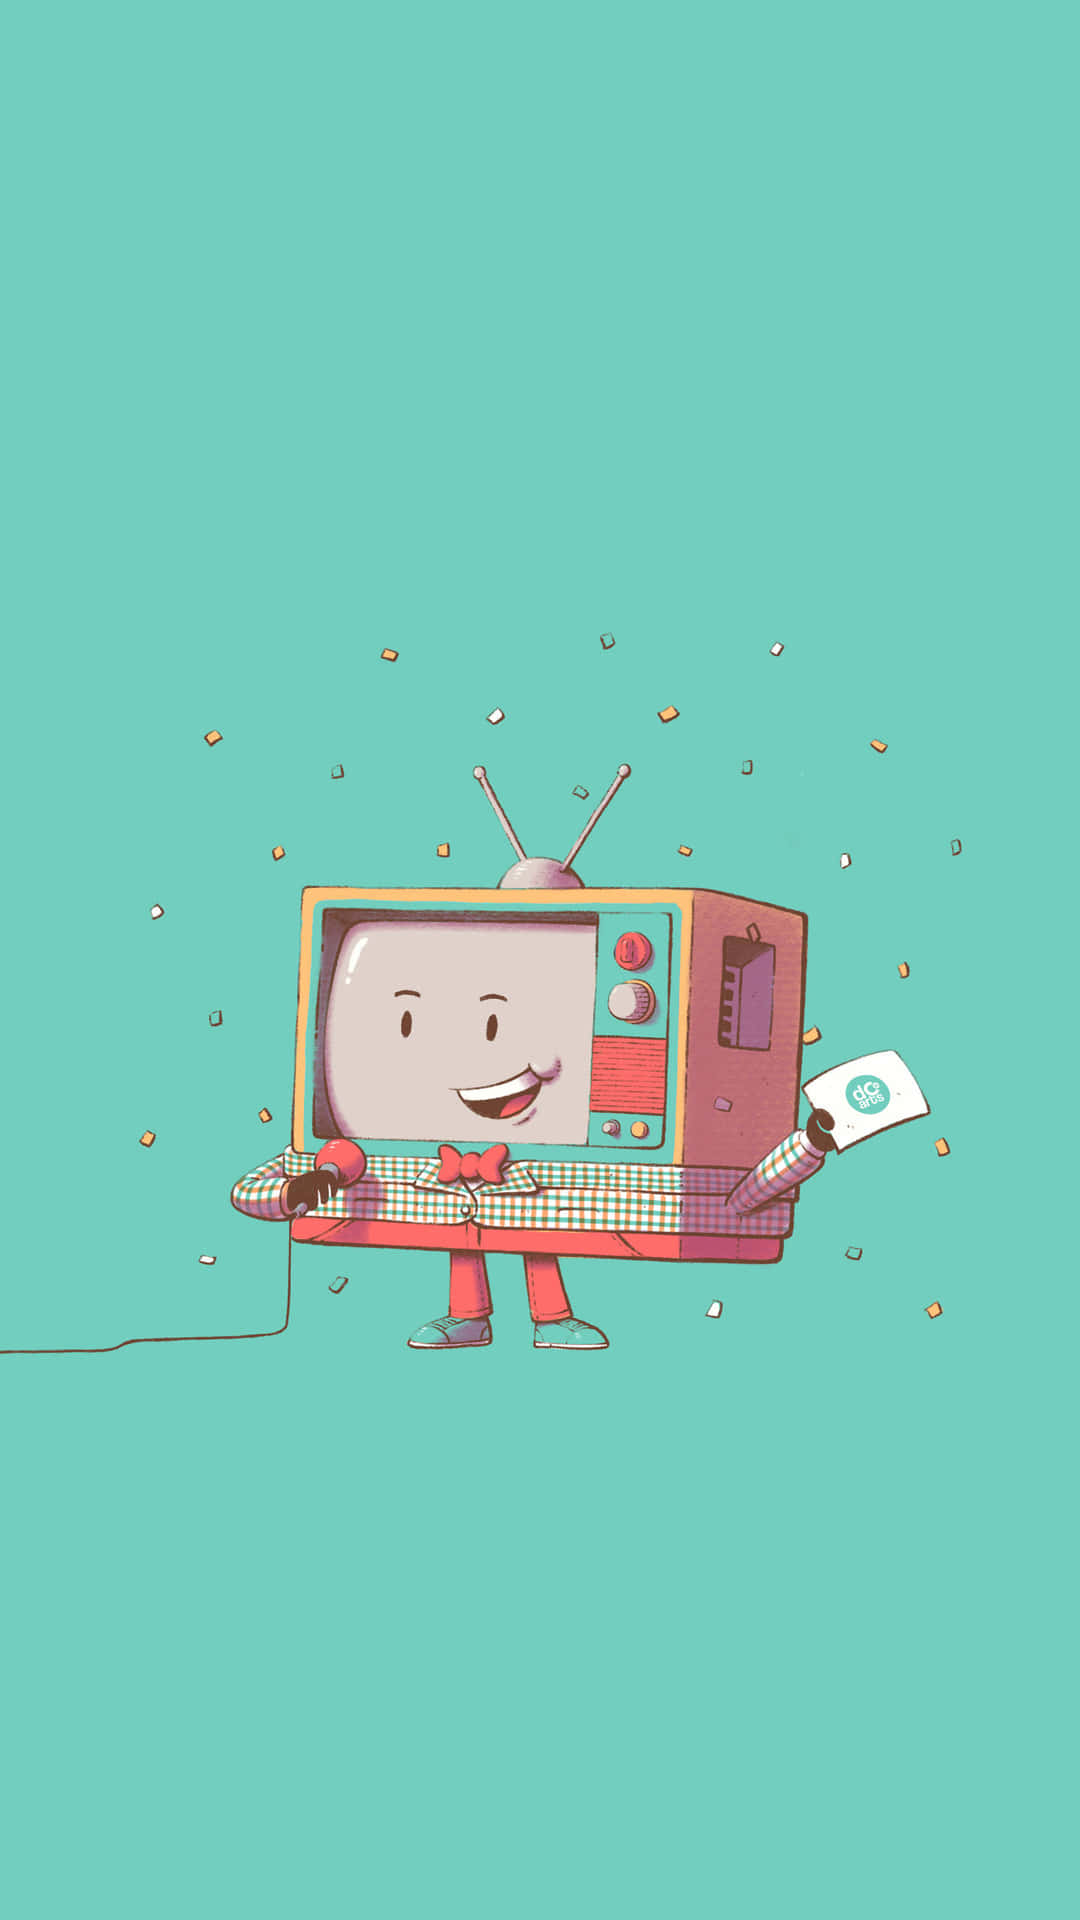 Cartoon Tv With A Man Holding A Remote Wallpaper